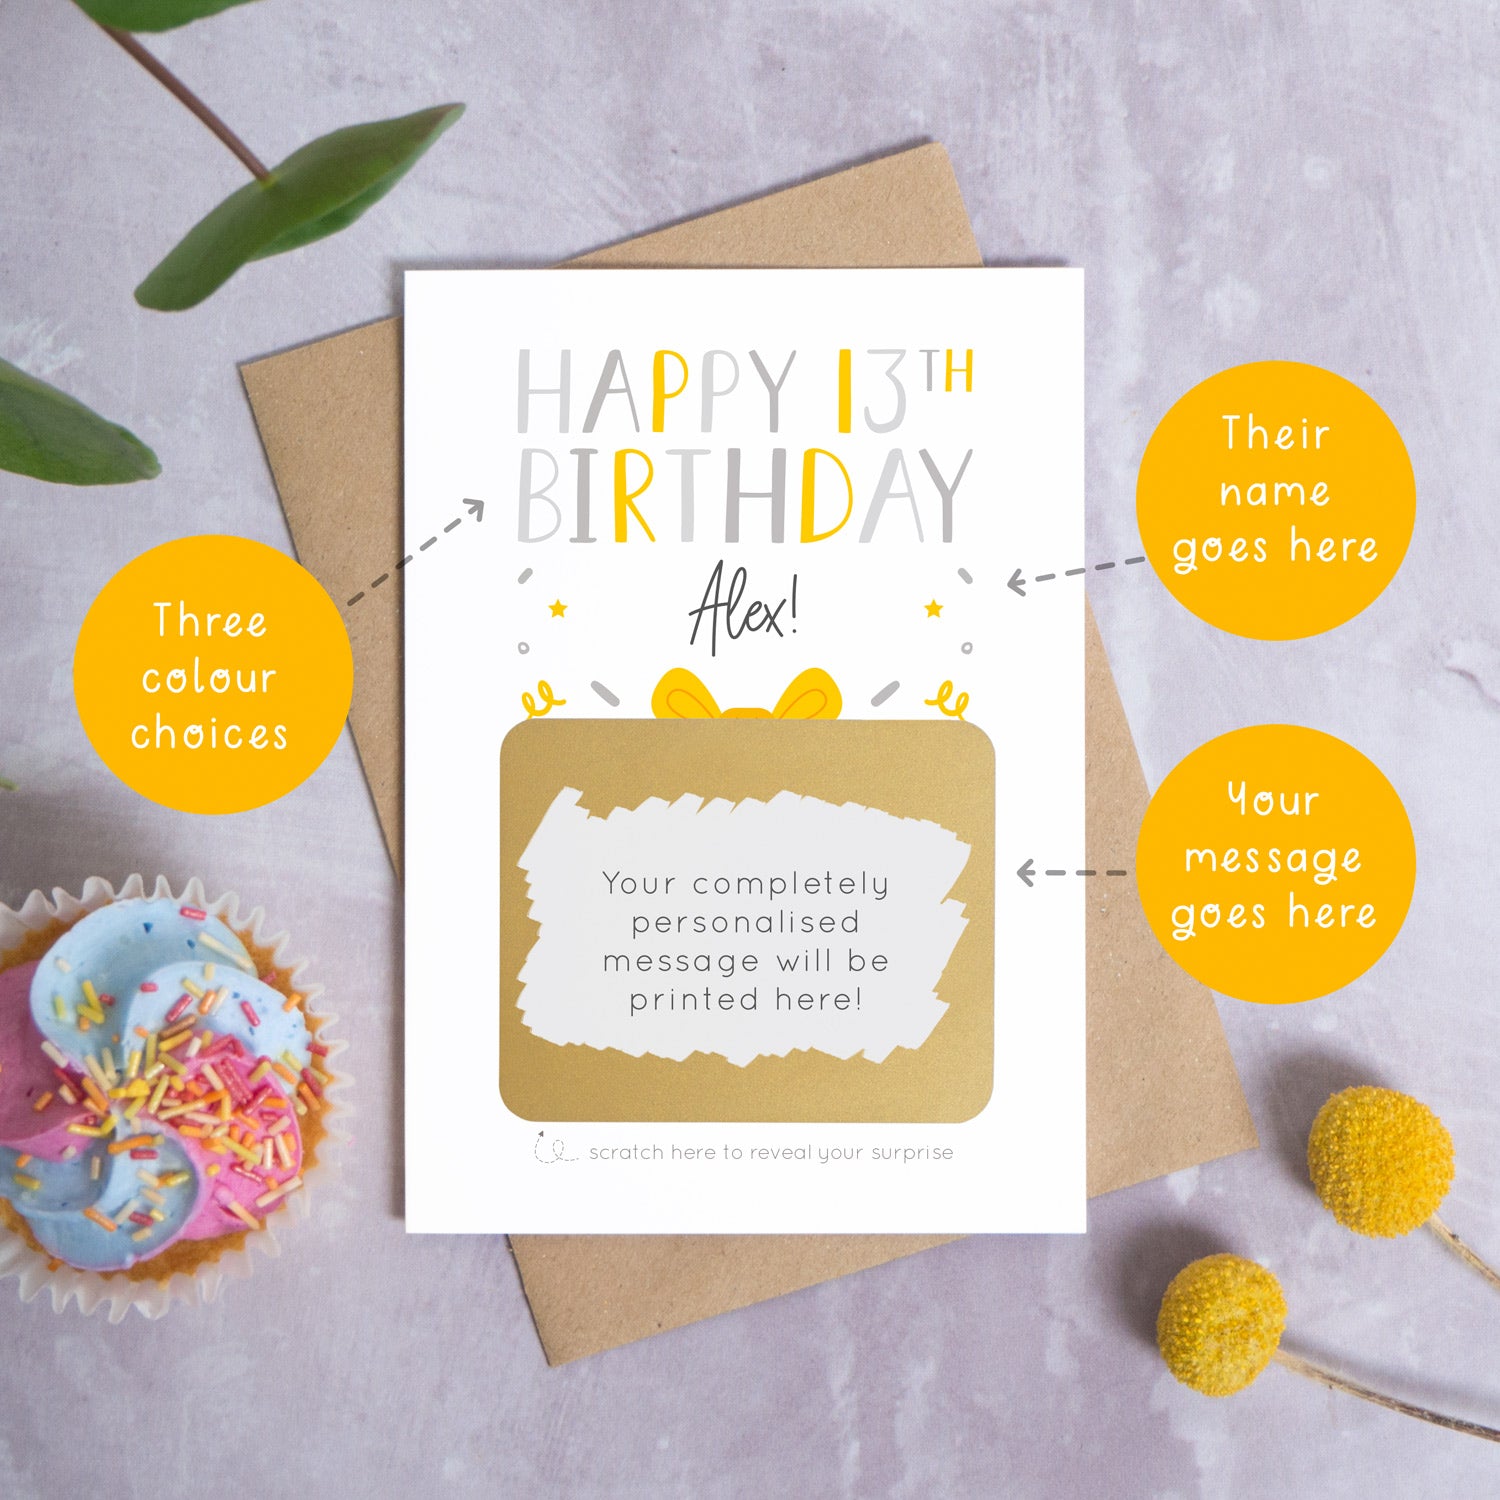 A personalised happy 13th birthday scratch card in grey that has been photographed on a grey background with foliage and a cupcake. There are also orange circles laid over the top of this image with arrows pointing to the areas that can be customised. In this instance they point to the name, the colour choices and the personalised scratch off message.